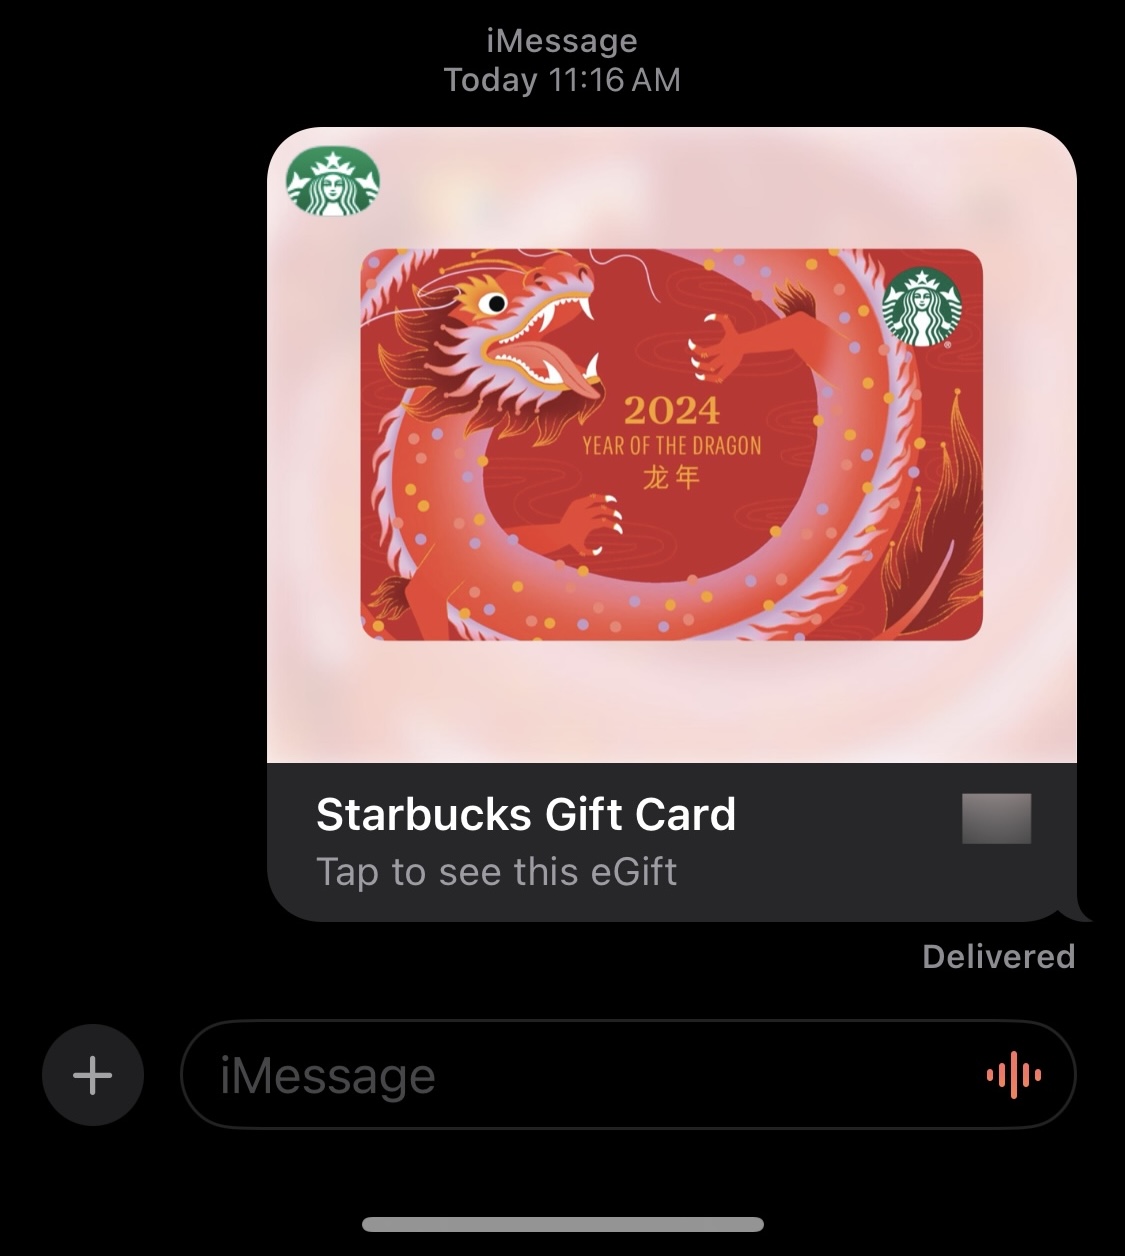 How To Buy Starbucks Gift Cards Online [STEP-BY-STEP!] - YouTube